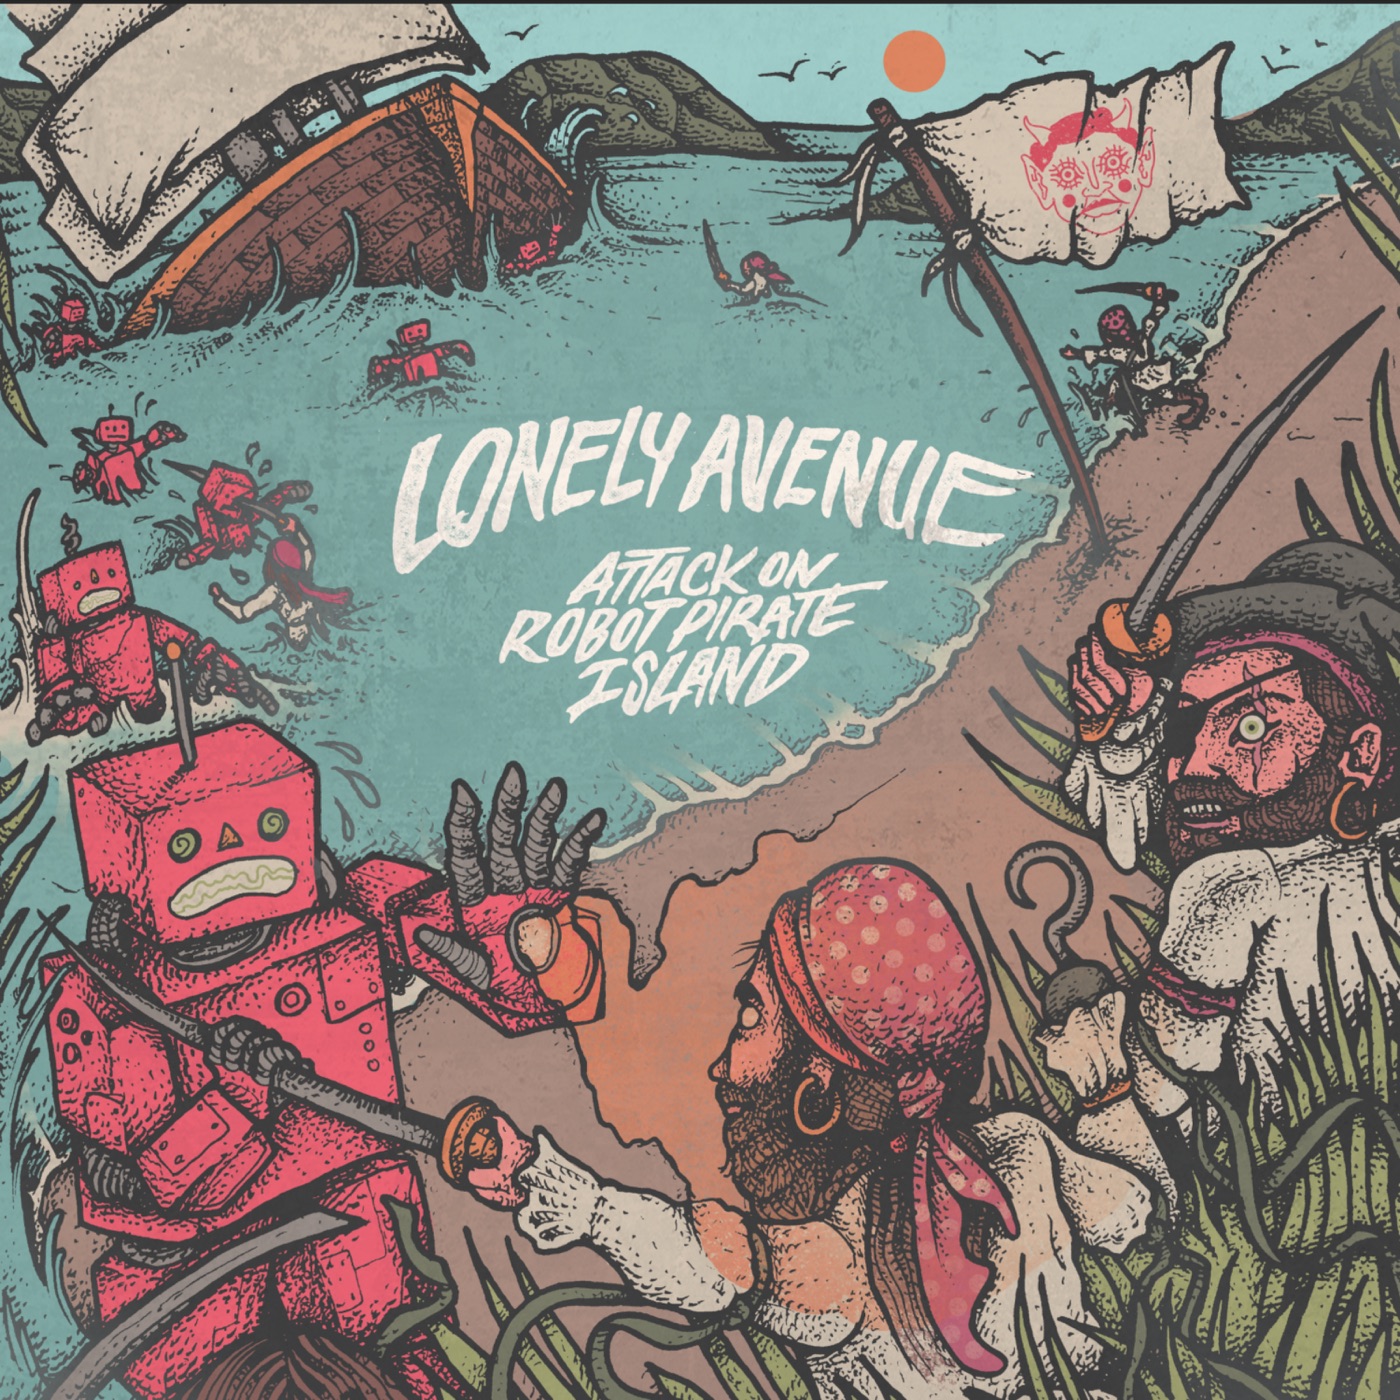 Lonely Avenue - Attack on Robot Pirate Island (2019)